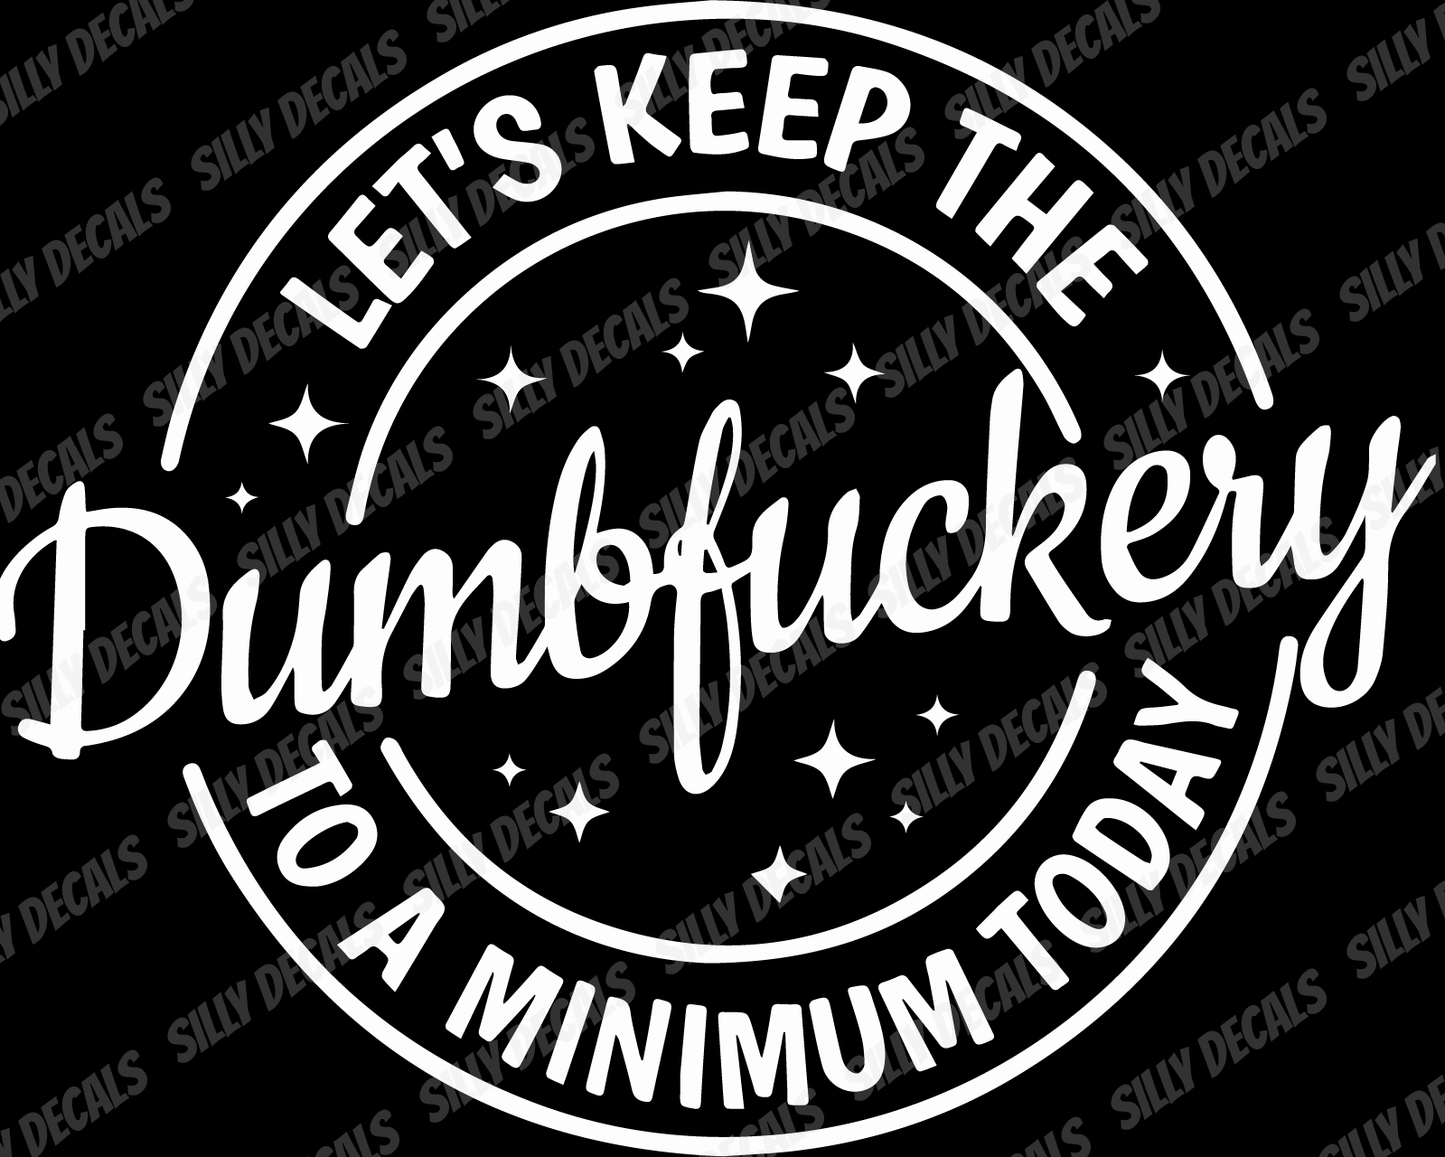 Let's Keep the Dumbfuckery To a Minimum Today; Funny Adult Vinyl Decals Suitable For Cars, Windows, Walls, and More!